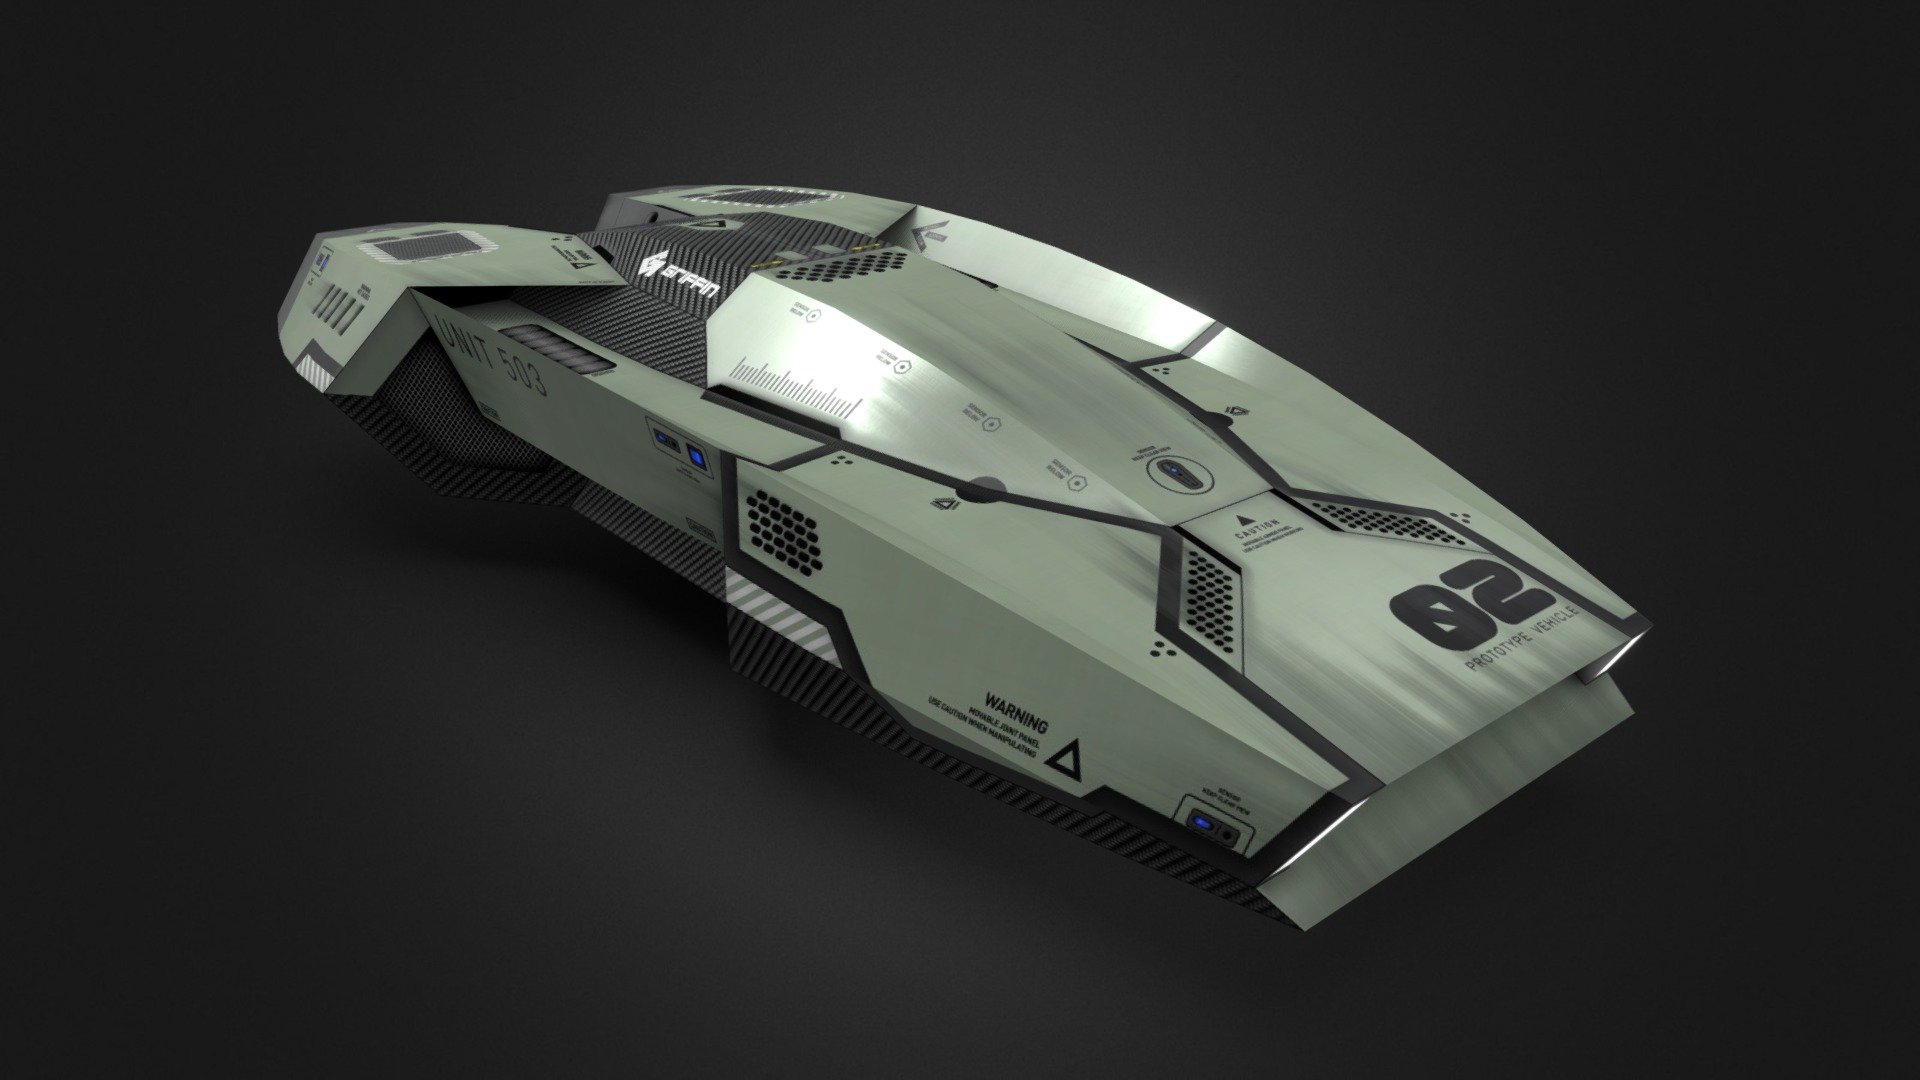 Custom ship for the game BallisticNG. Antigravity racing game inspired by Wipeout 3d model